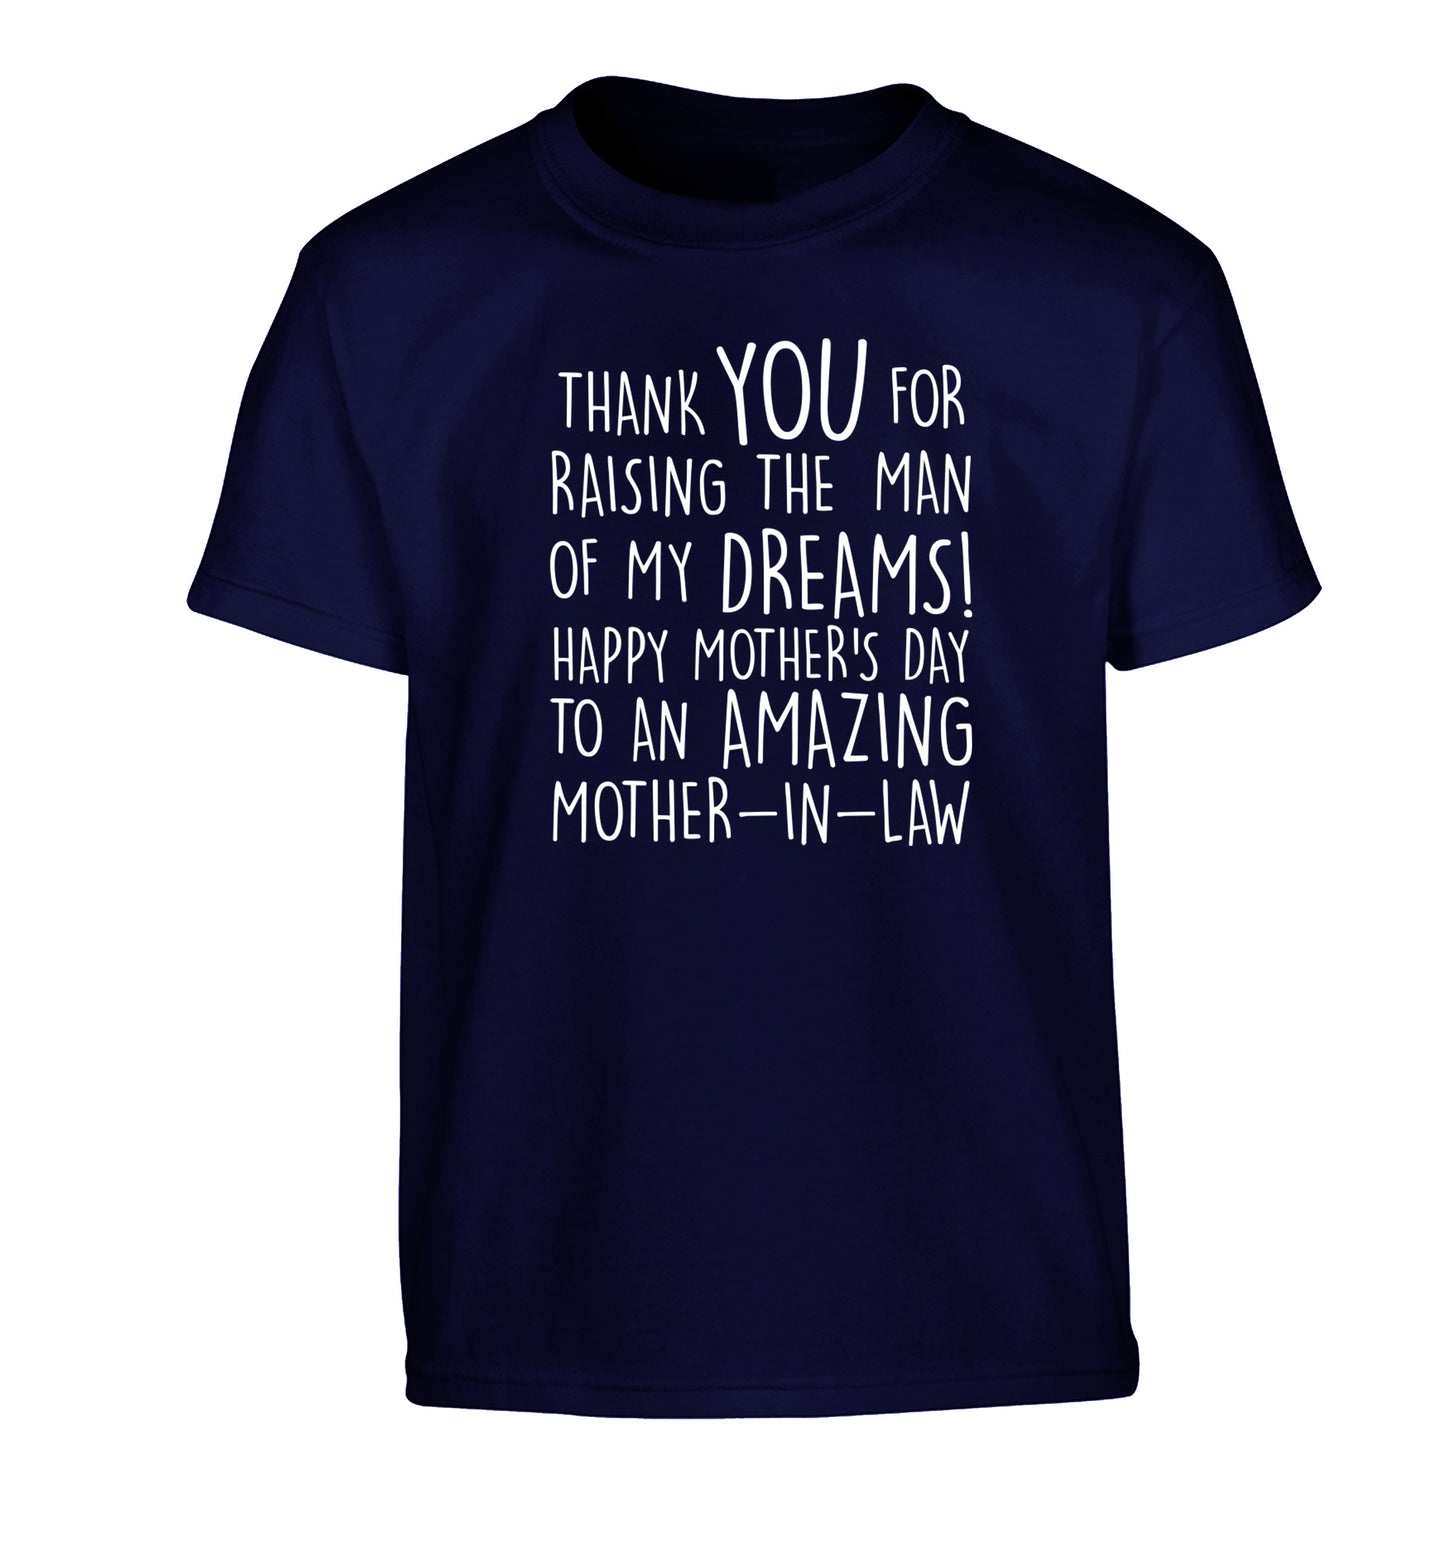 Thank you for raising the man of my dreams happy mother's day mother-in-law Children's navy Tshirt 12-13 Years